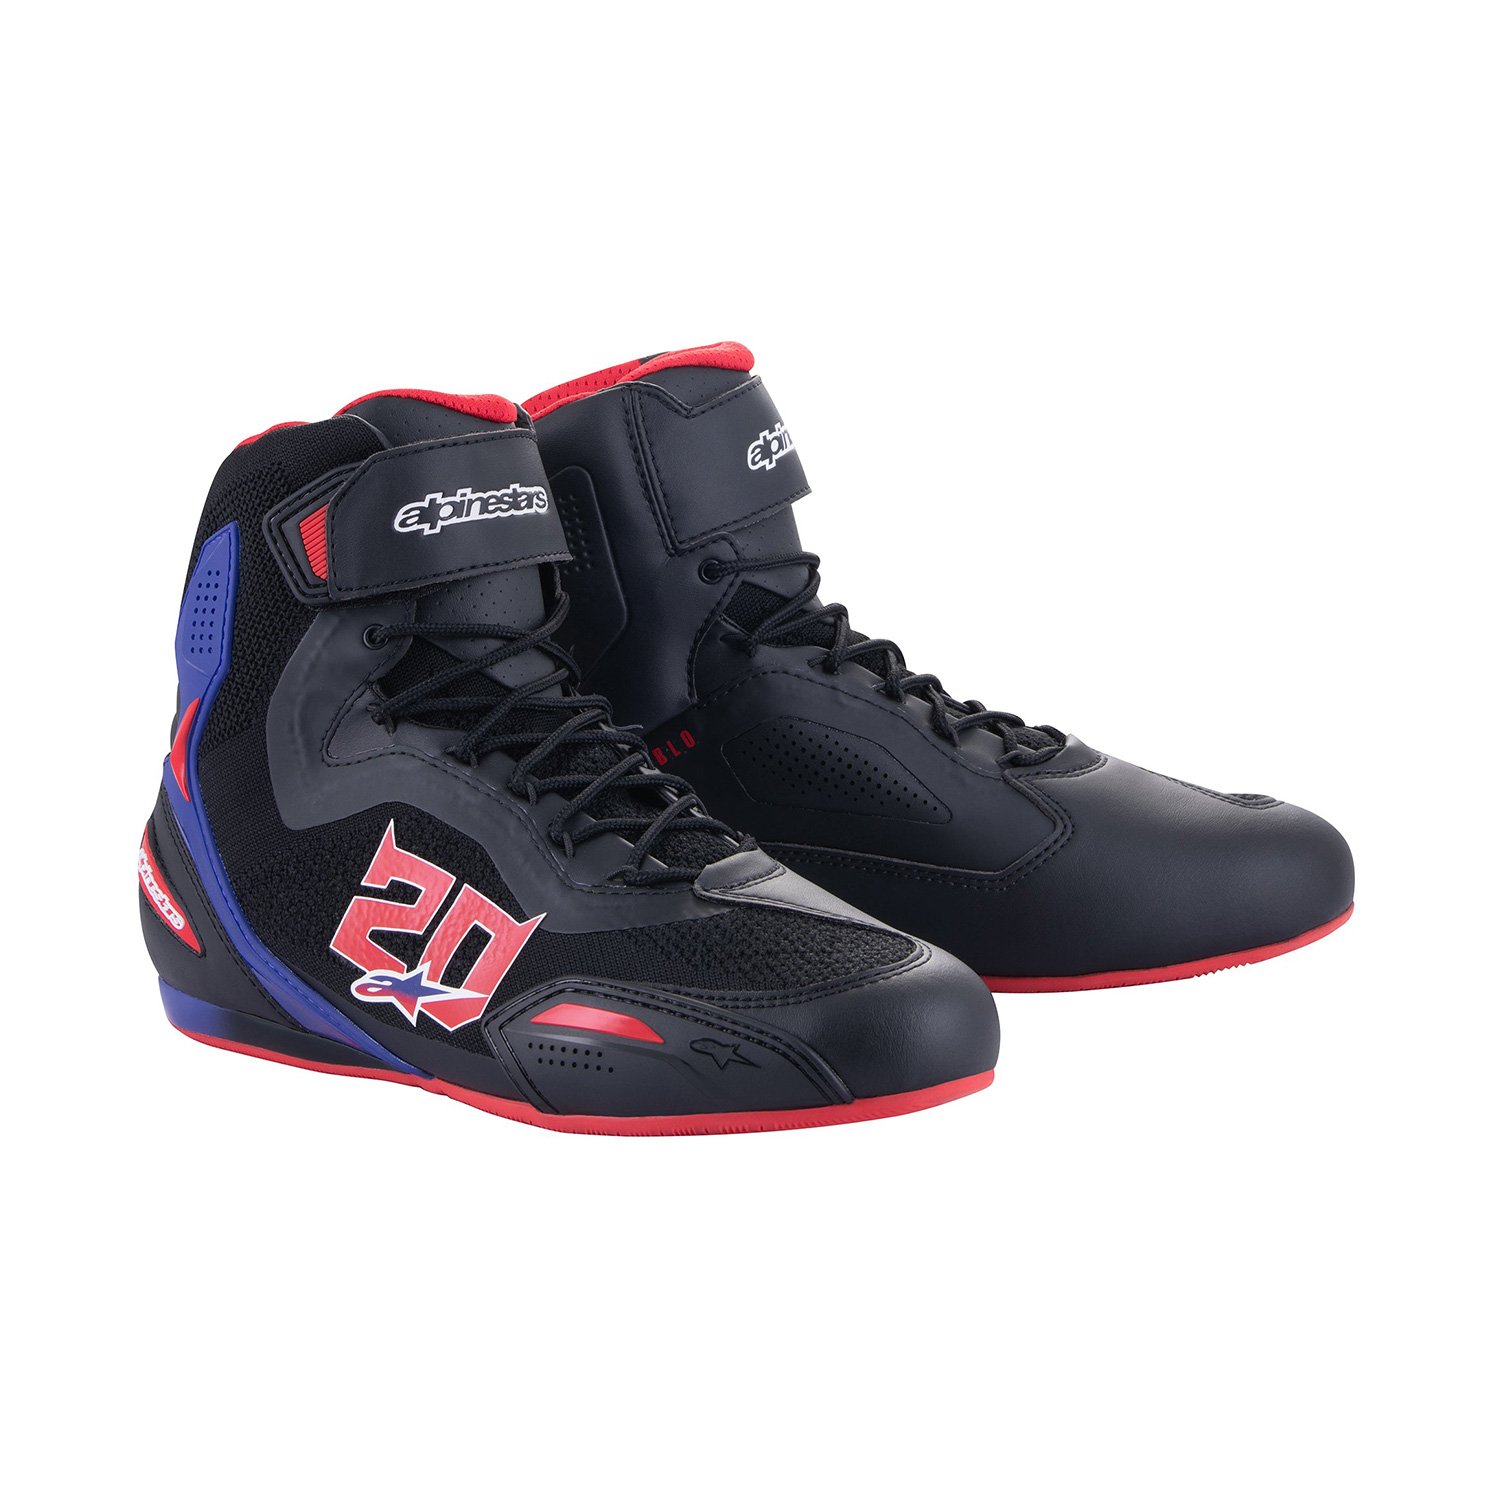 Image of Alpinestars FQ20 Faster-3 Rideknit Noir Bright Rouge Bleu Chaussures Taille US 75